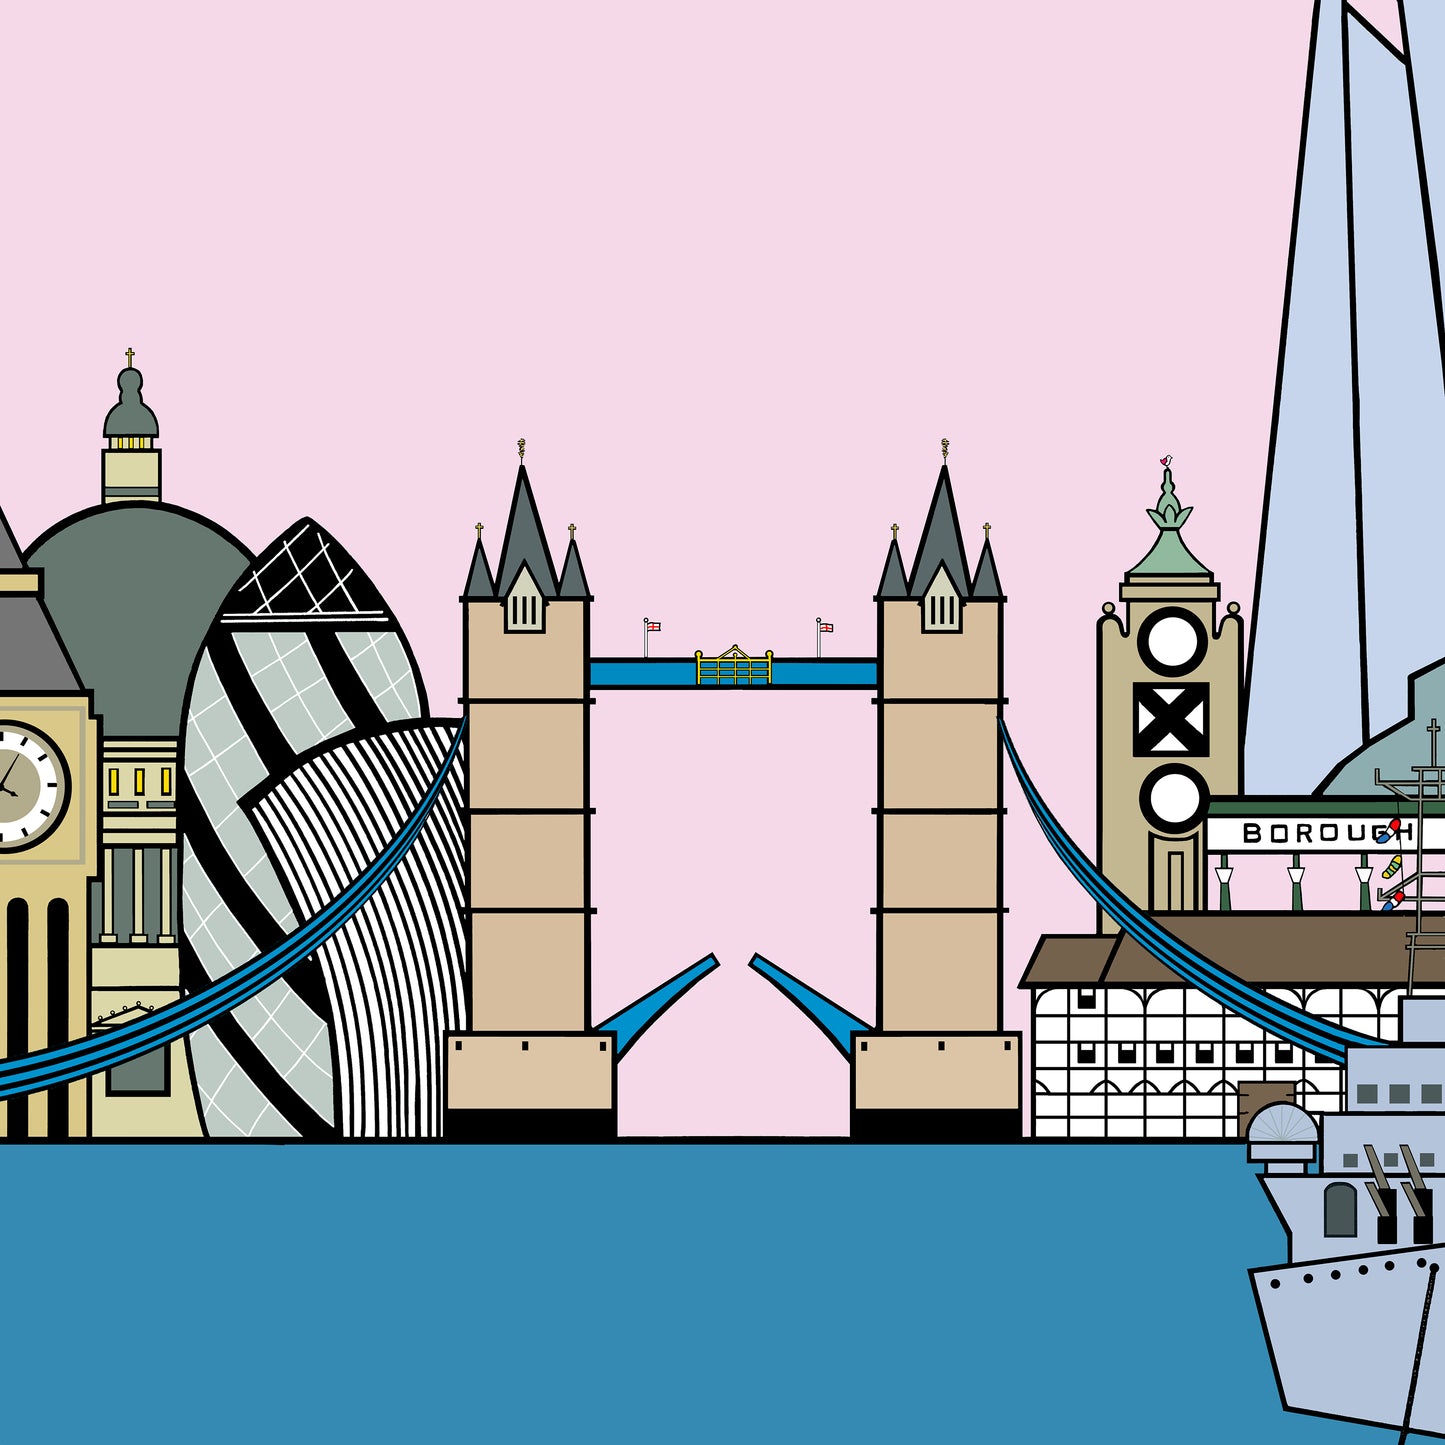 A pale pink sky is in the background of famous buildings and bridges in London, including big ben, the shard, london bridge and st pauls cathedral. In front is the thames in a blue teal colour with a small boat to the right.